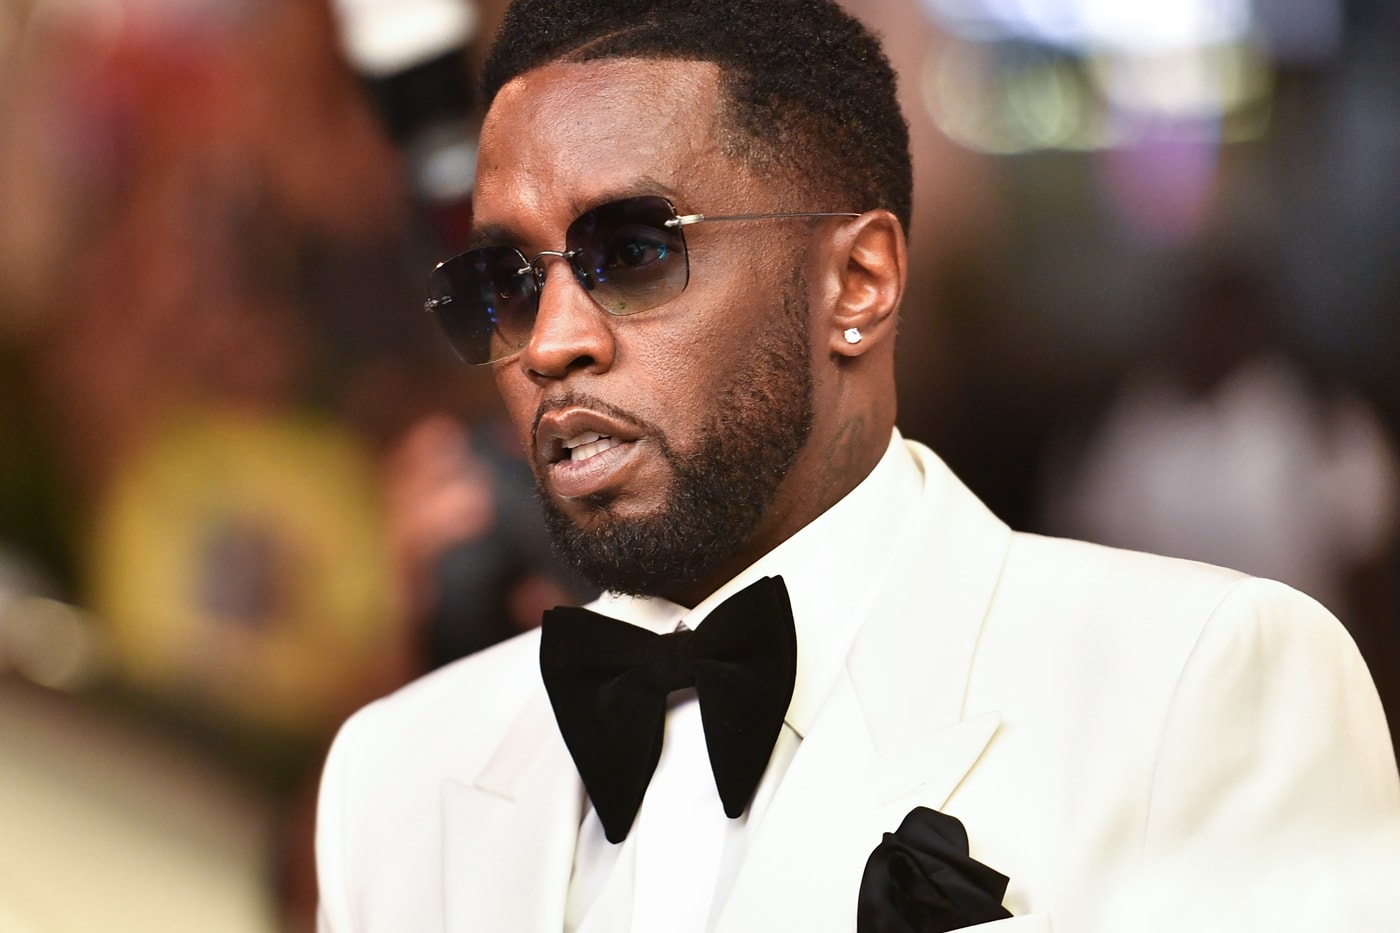 Diddy Releases Statement Regarding Recent Home Raid in Sex Trafficking Investigation sean diddy combs puff daddy love rapper artist mogul producer entrepreneur miami los angeles attorney lawyer witch hunt unprecedented ambush